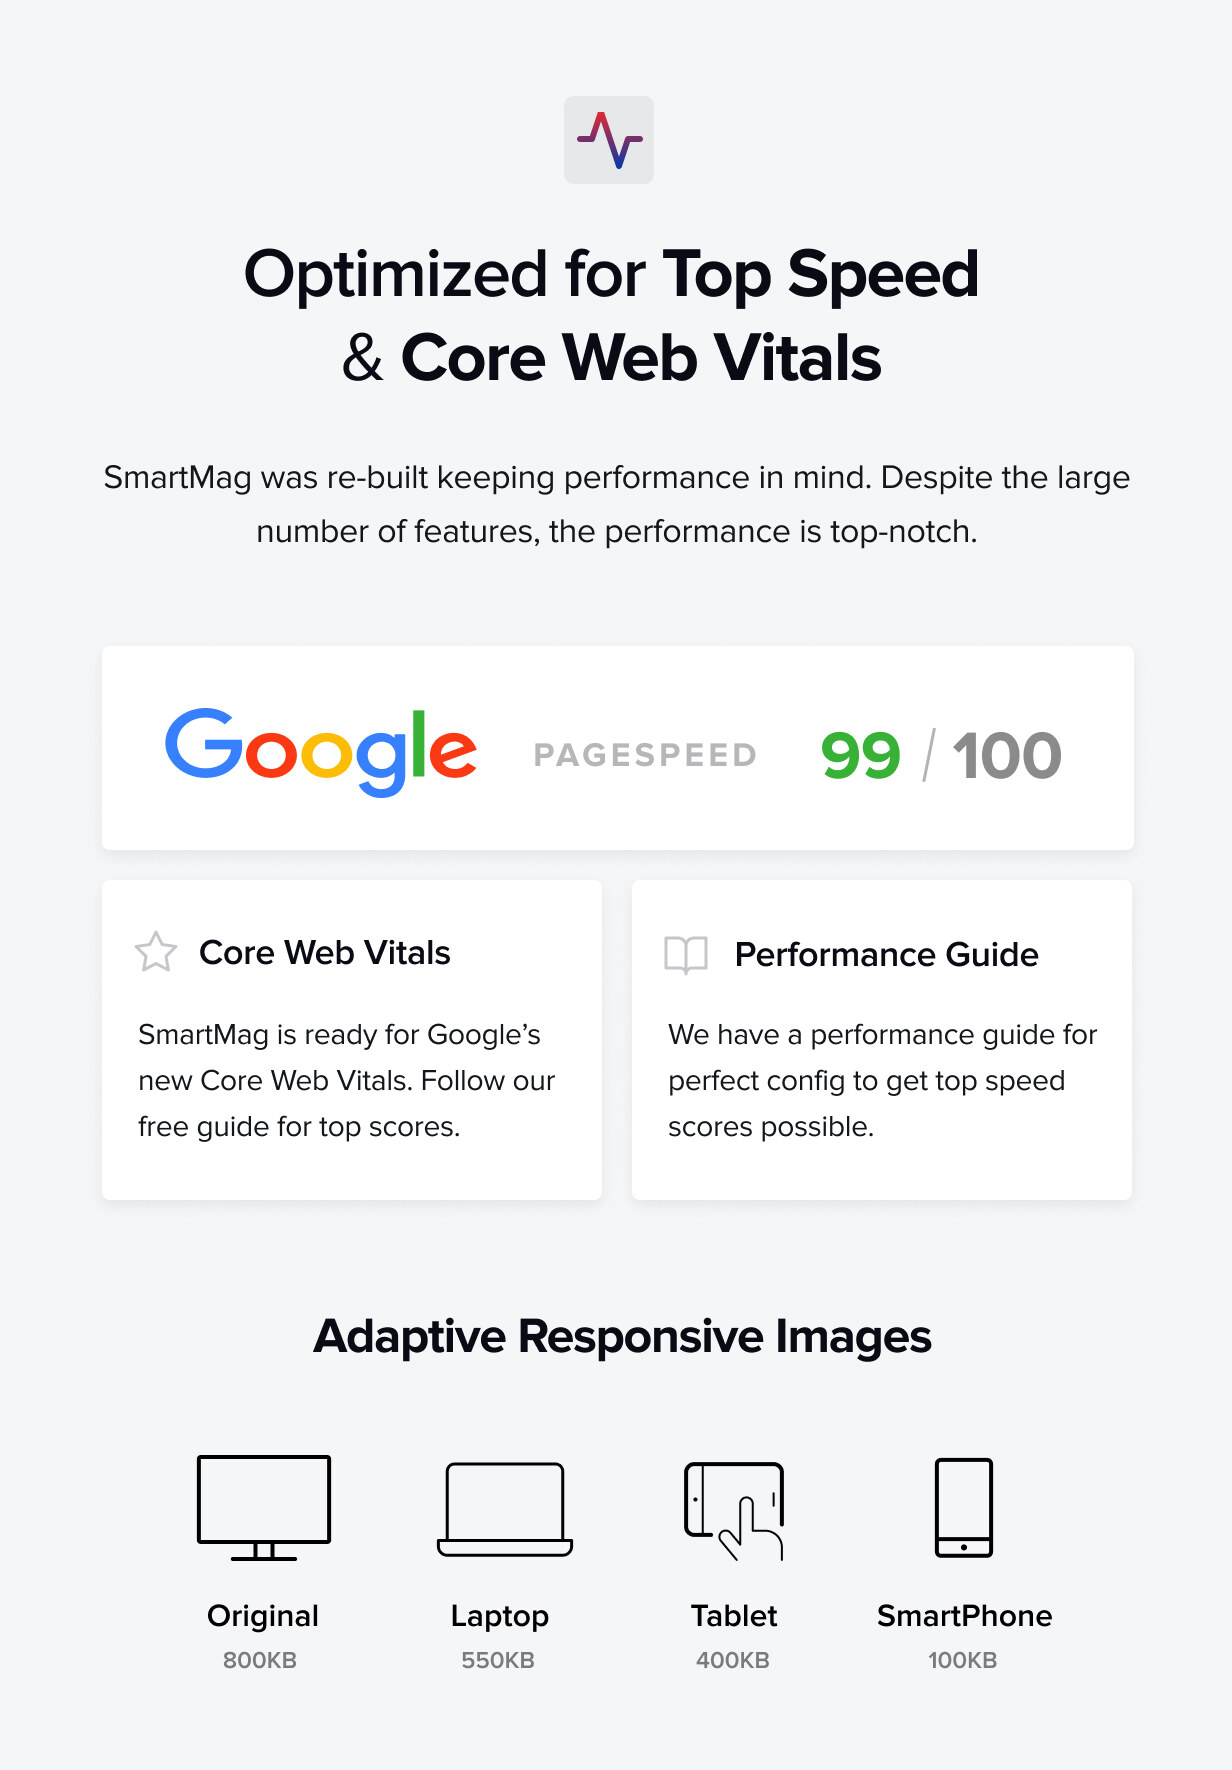 Top Speed & Performance and Google AMP